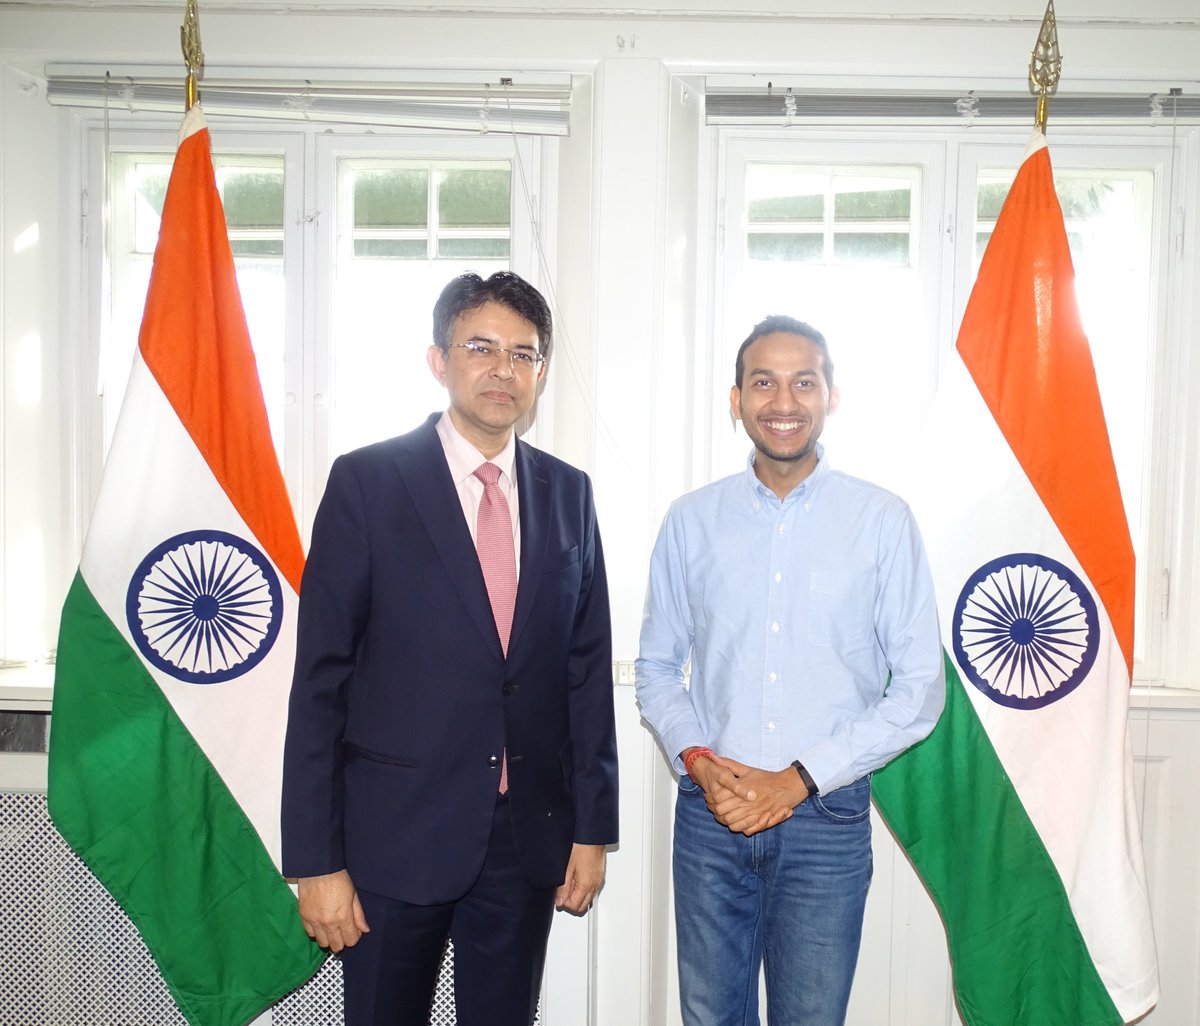 Amb @manishprabhat06 received CEO of @OYORooms @riteshagar who briefed him on #OYO's increasing business footprint in Denmark. OYO’s expansion has added to #IndiaDenmark strategic business partnership. #DanCenter #Danland #BornholmskeFeriehuse #dkbiz #OYORooms